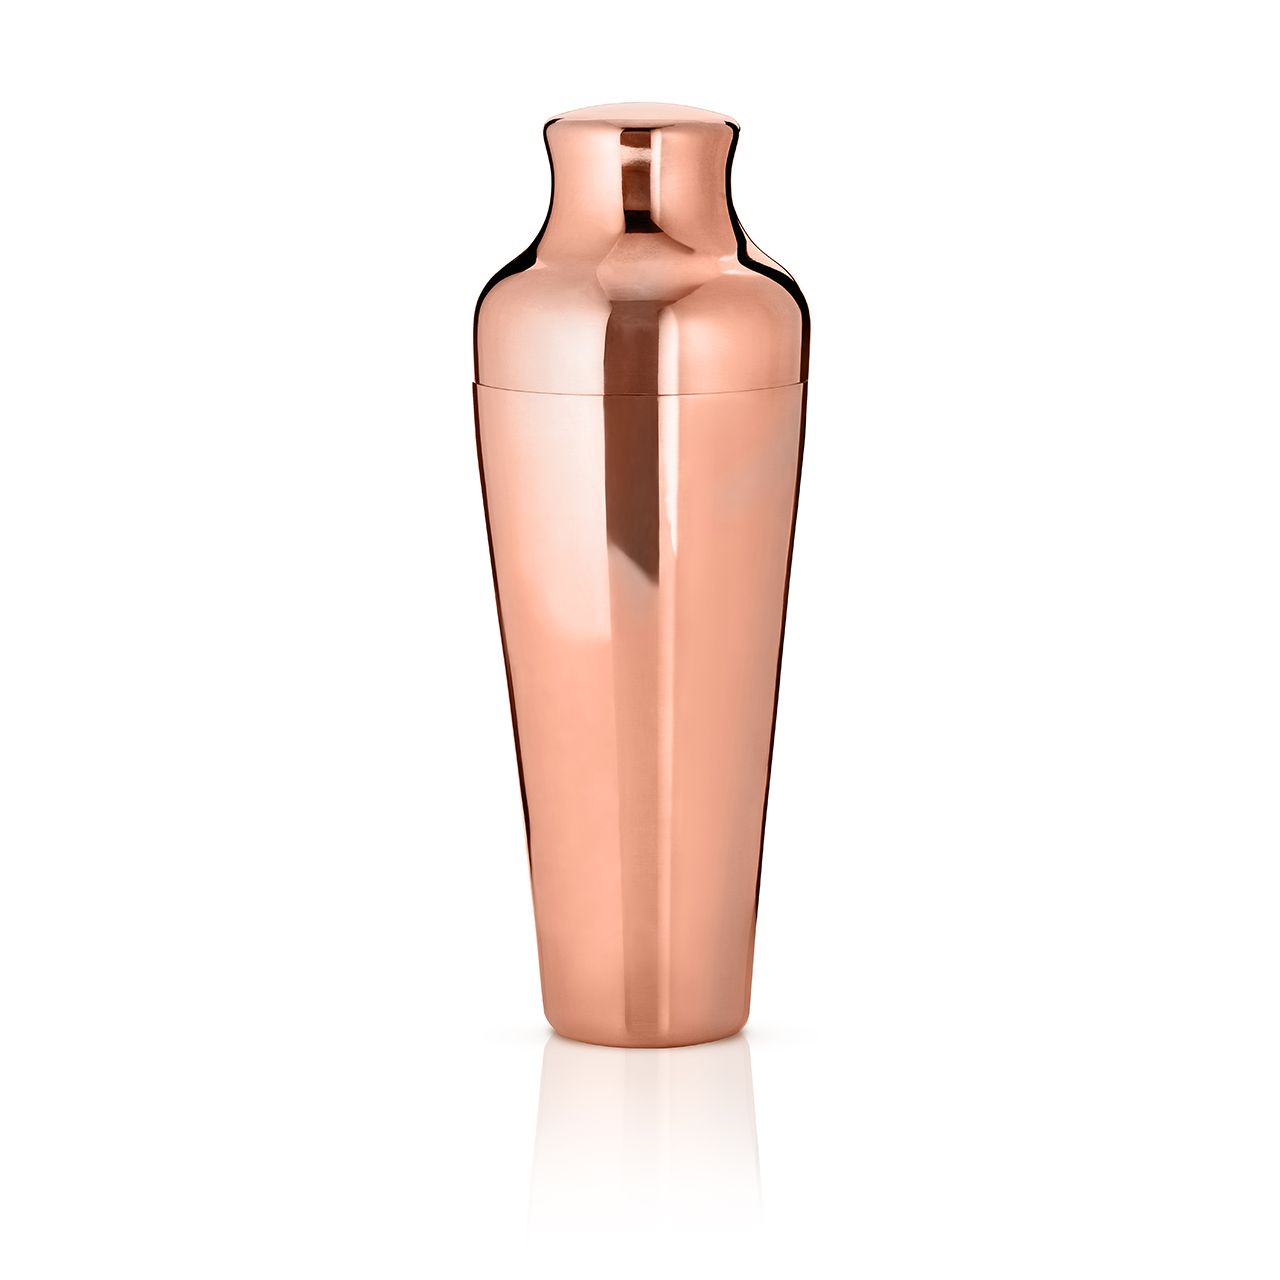 https://cdn10.bigcommerce.com/s-9dzfgkp0th/products/1678/images/2146/Viski-Summit-Copper-Cocktail-Shaker-James-Anthony-Collection__60186.1502985598.1280.1280.png?c=2